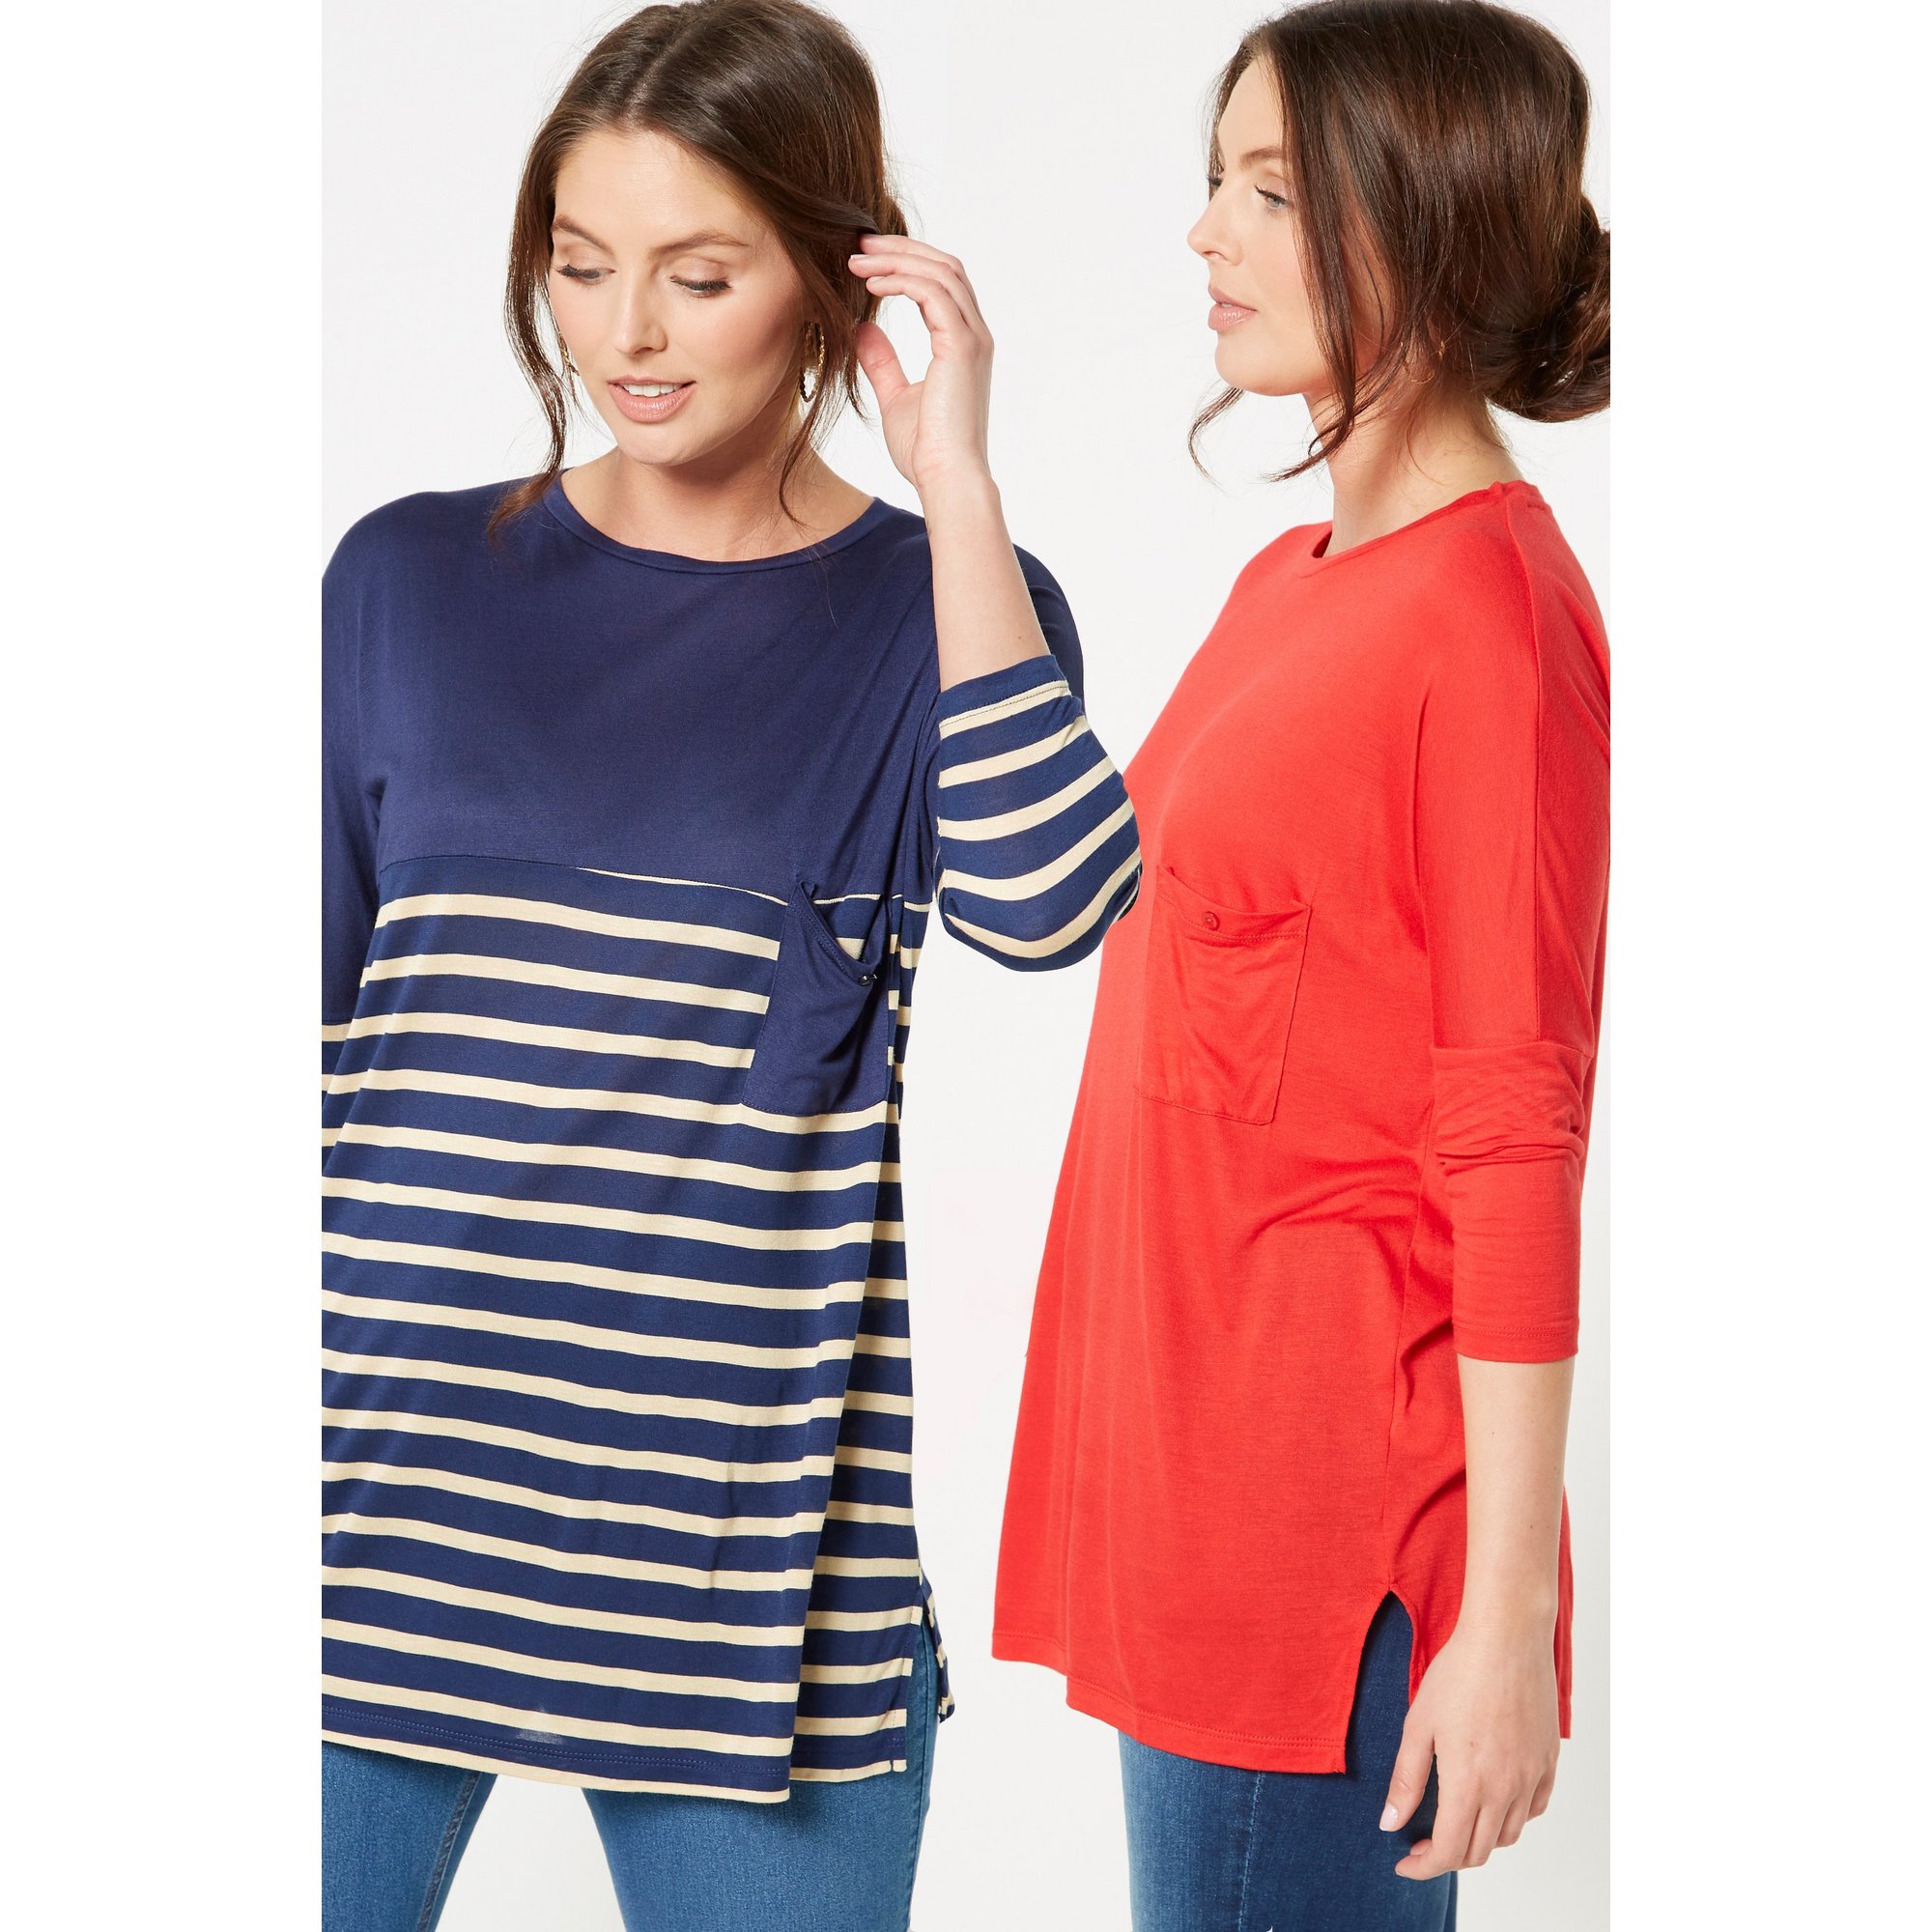 Pack of 2 Drop Shoulder 3/4 Sleeve Navy and Red T-Shirts